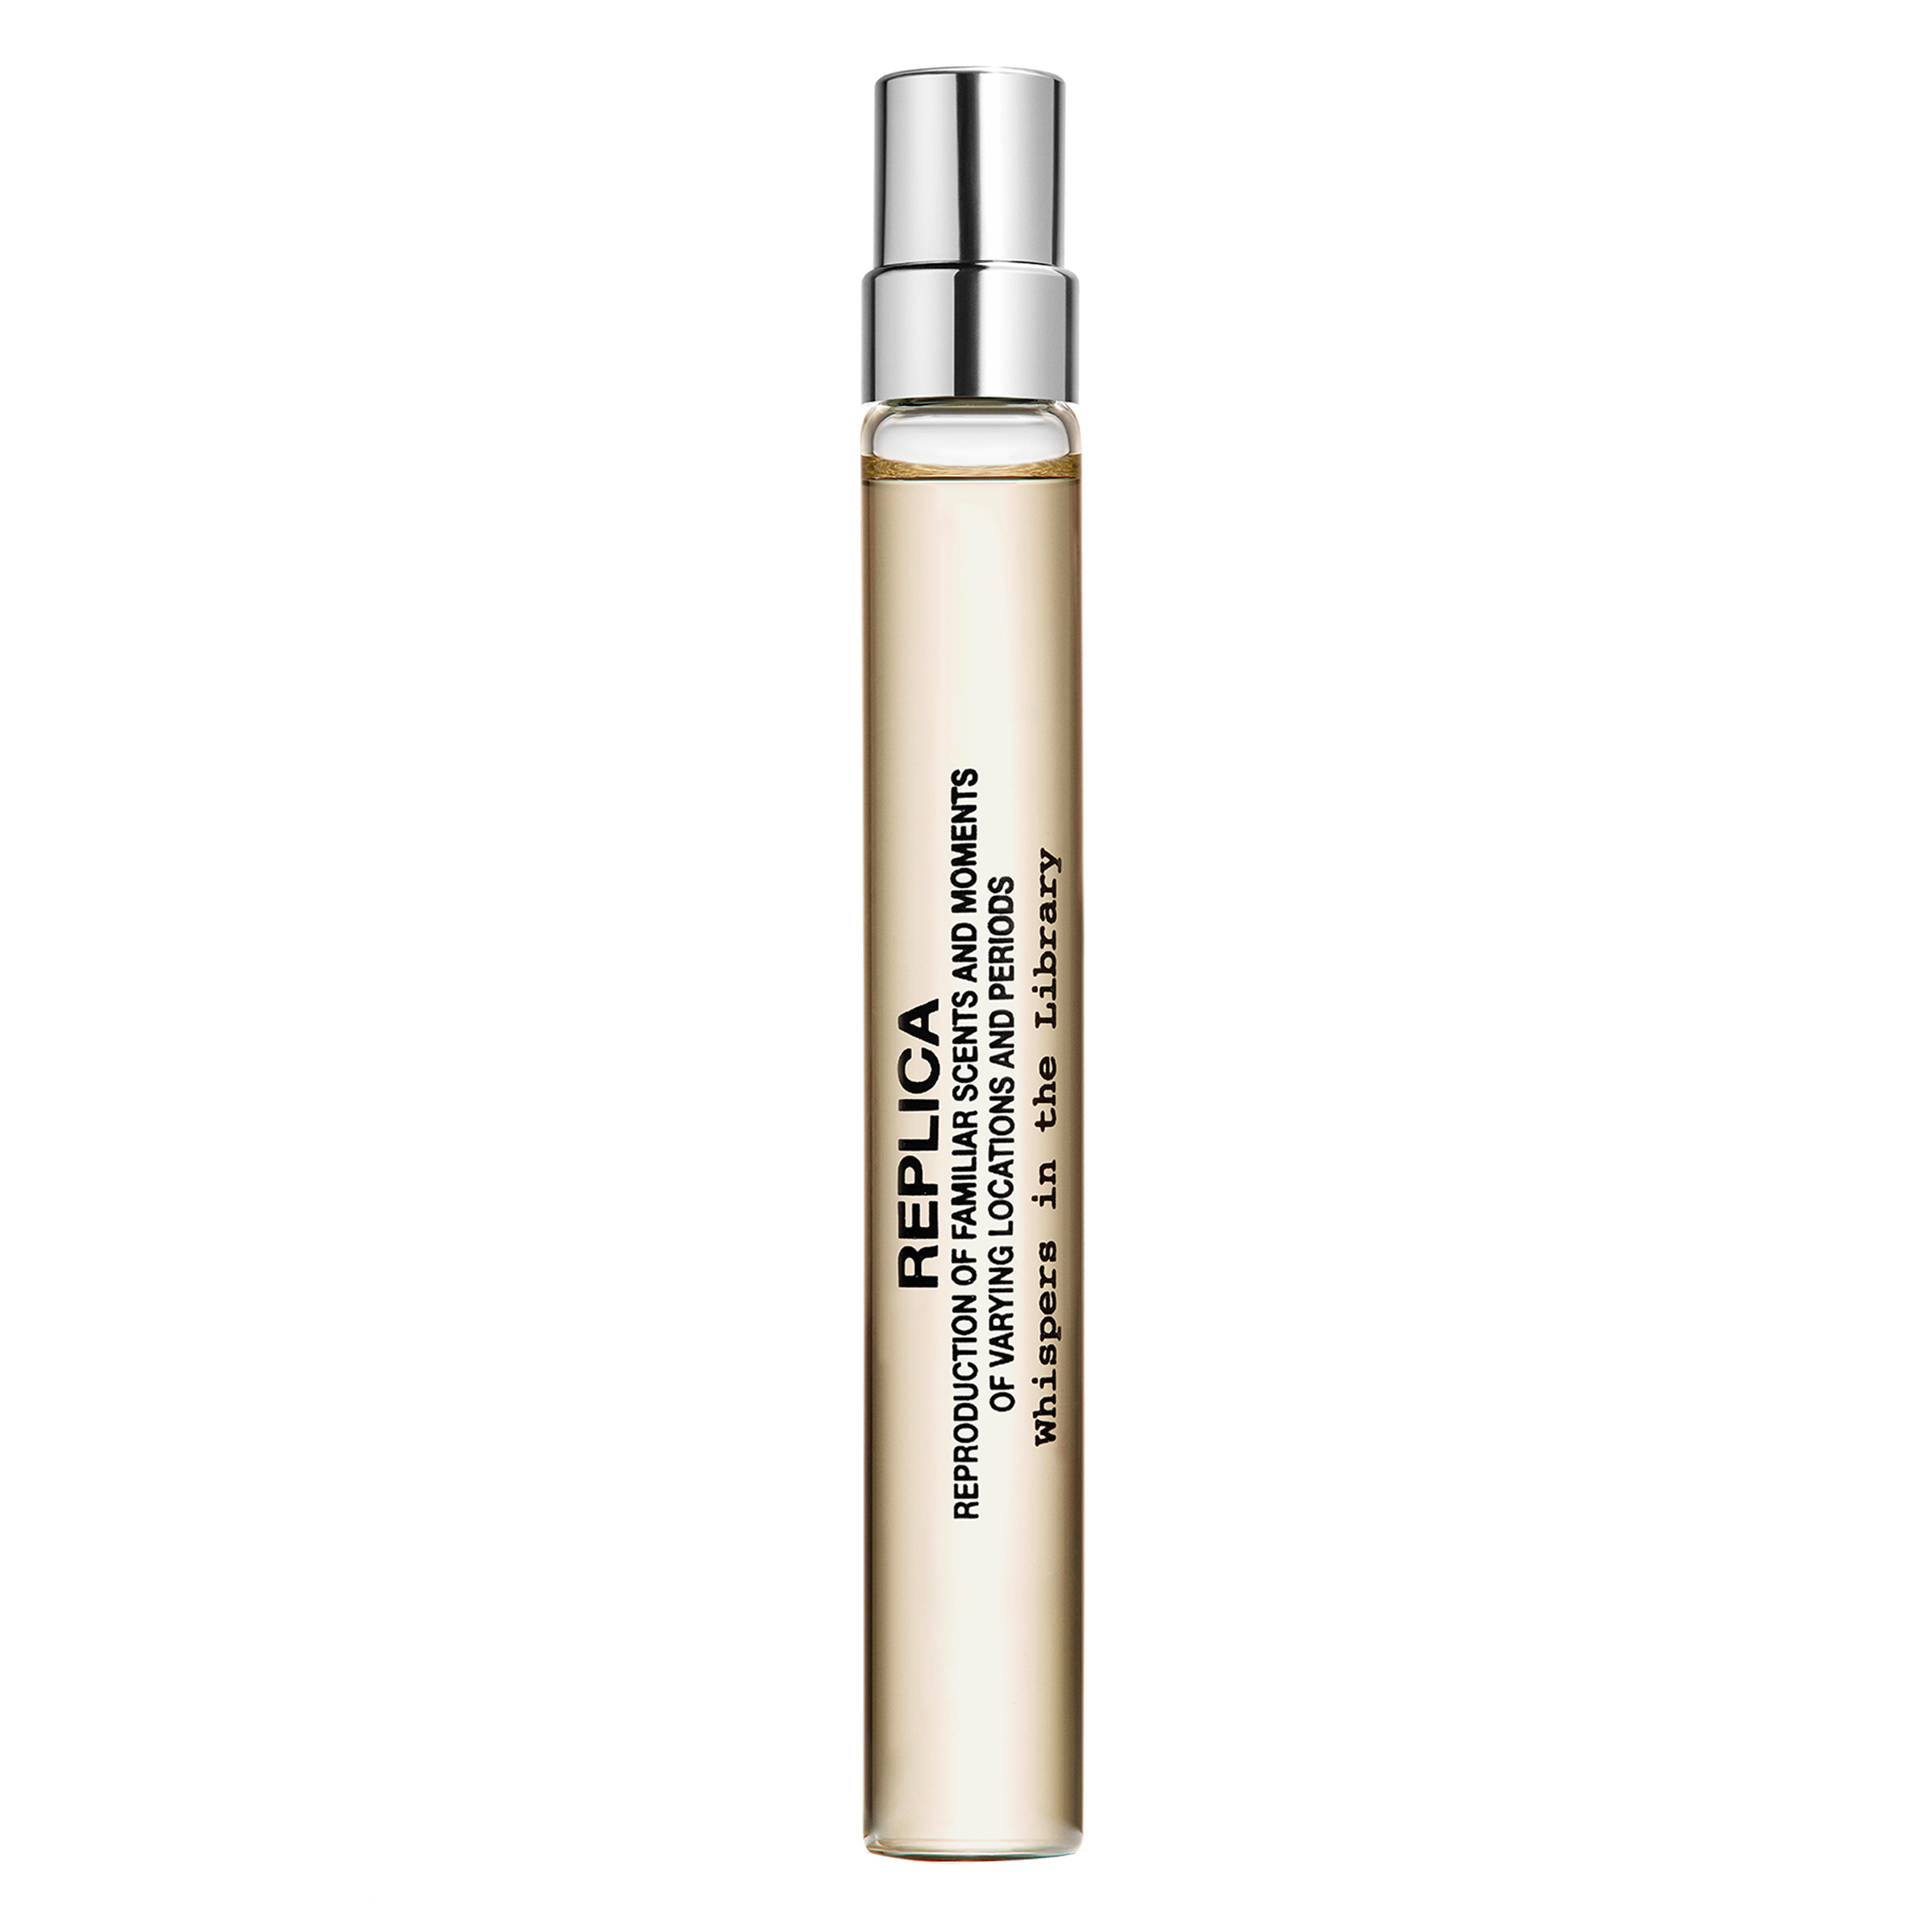 REPLICA Whispers in the Library Travel Spray | Maison Margiela